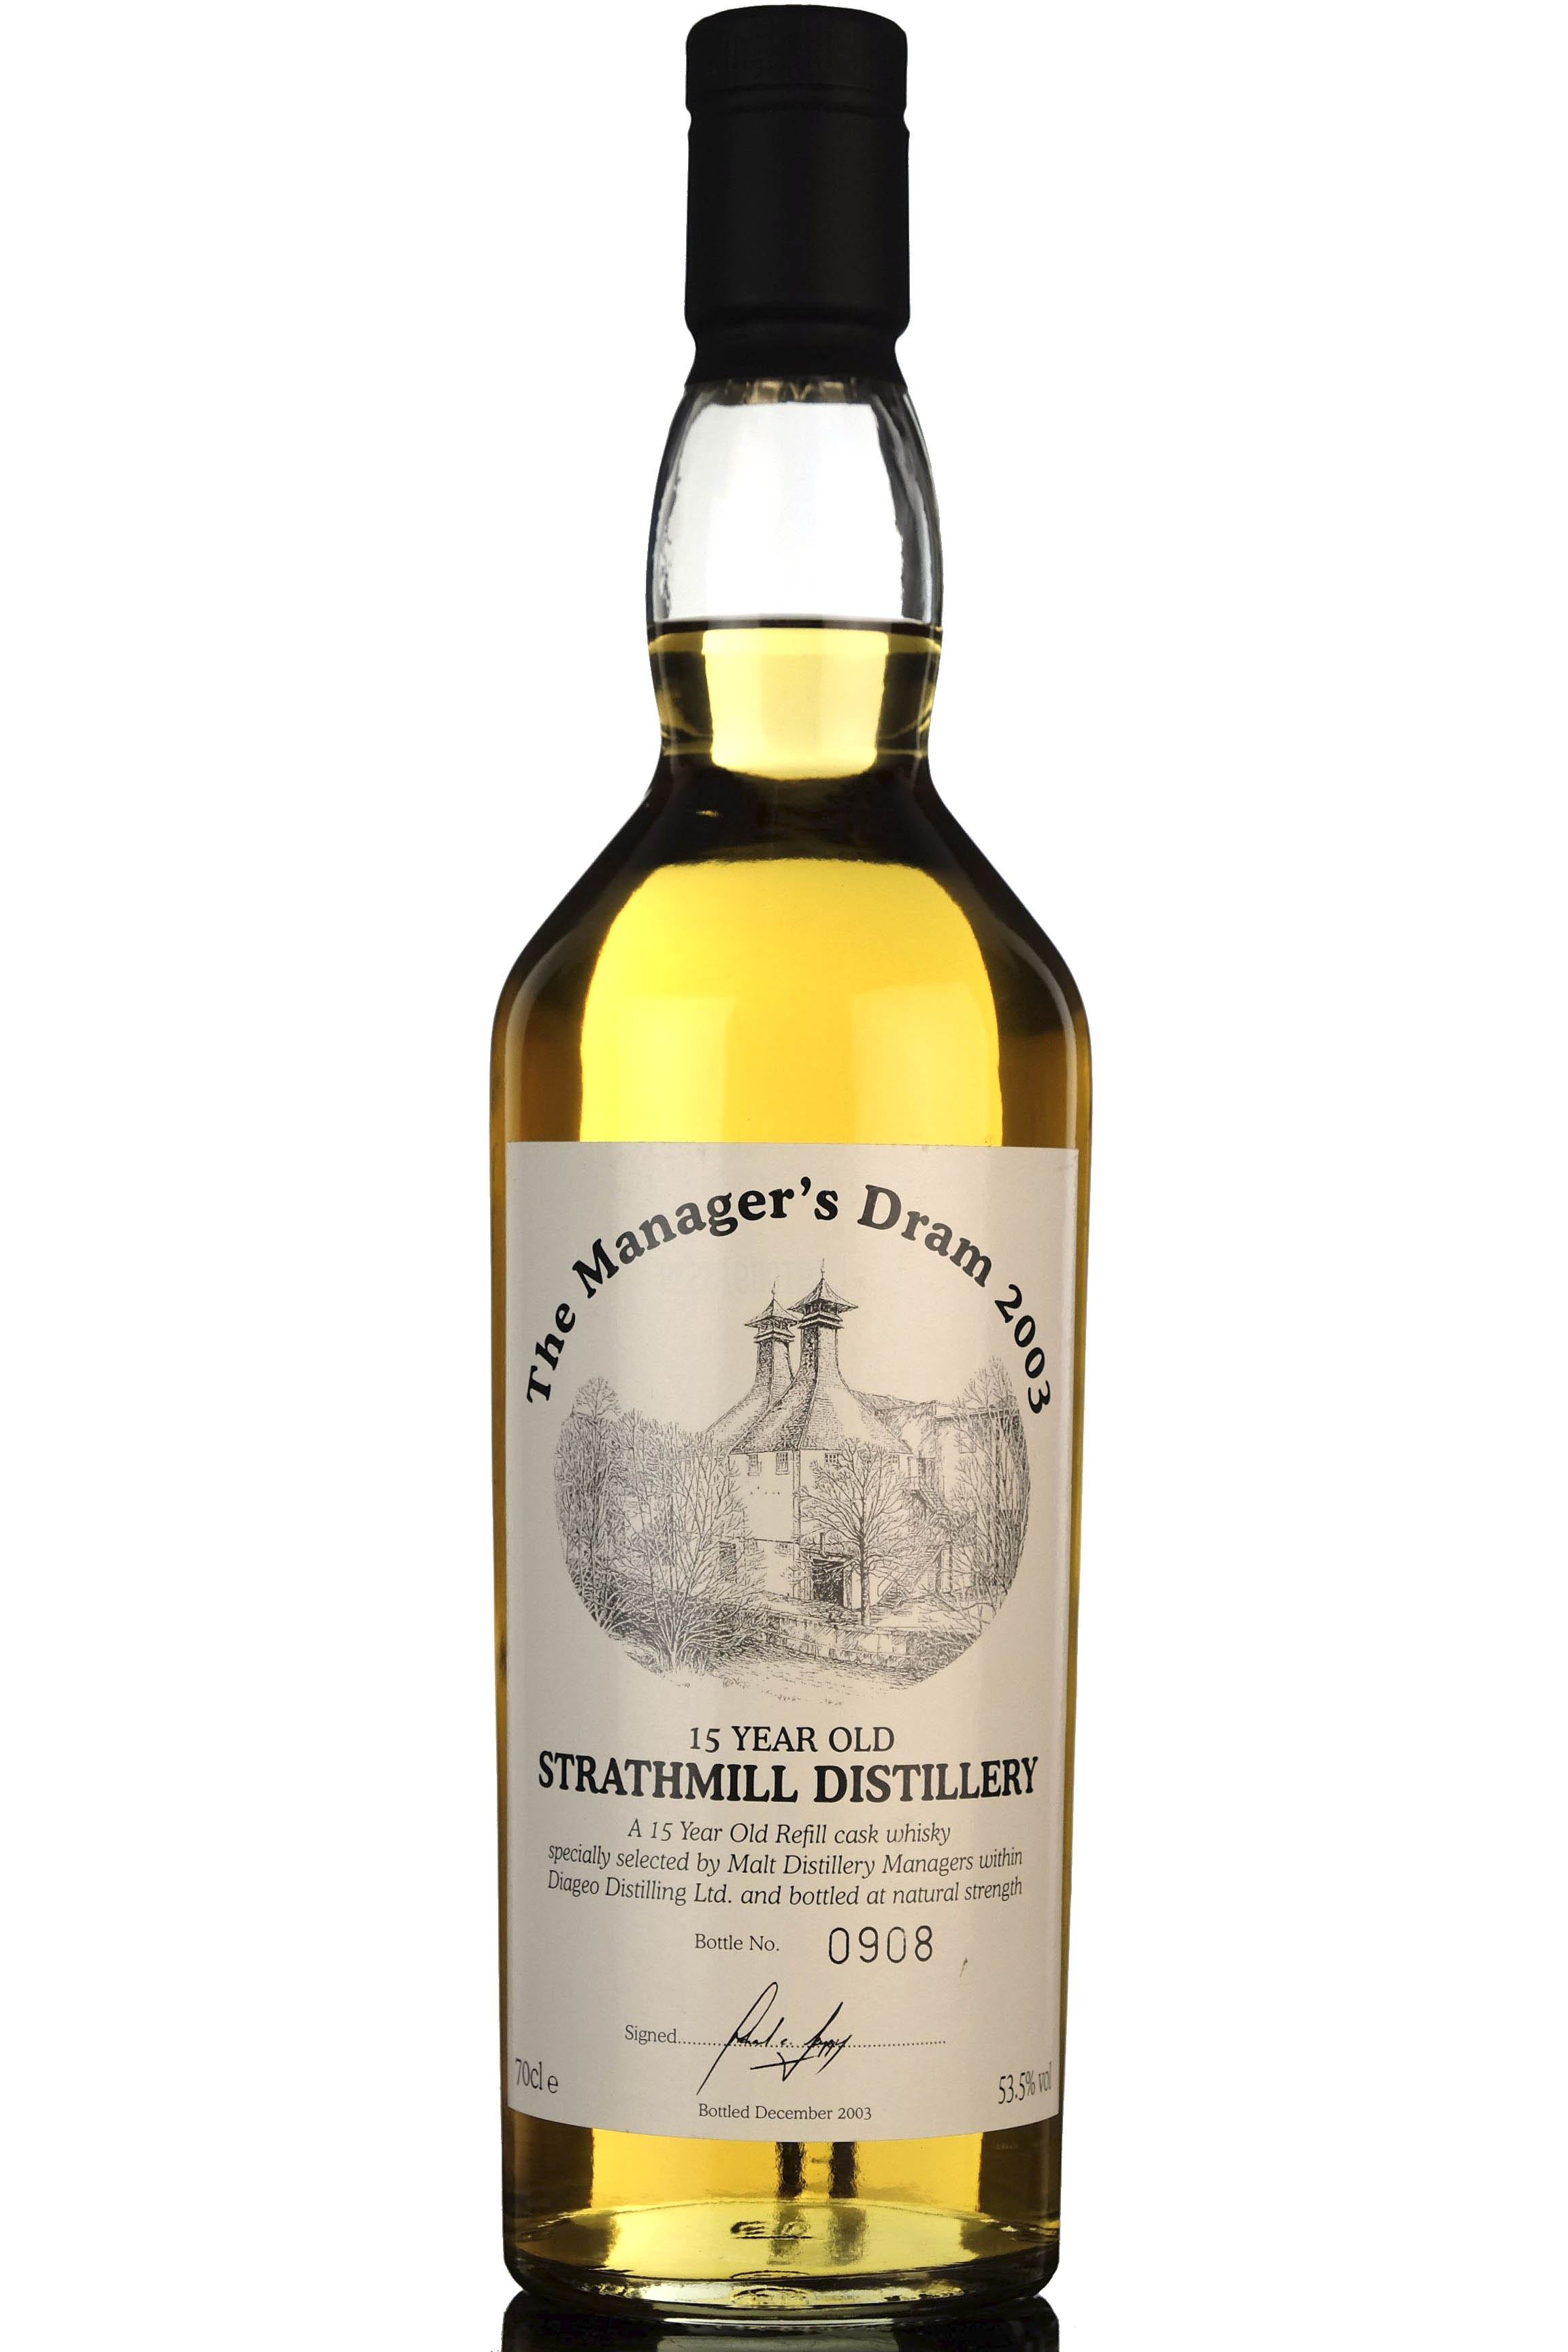 Strathmill 15 Year Old - Managers Dram 2003